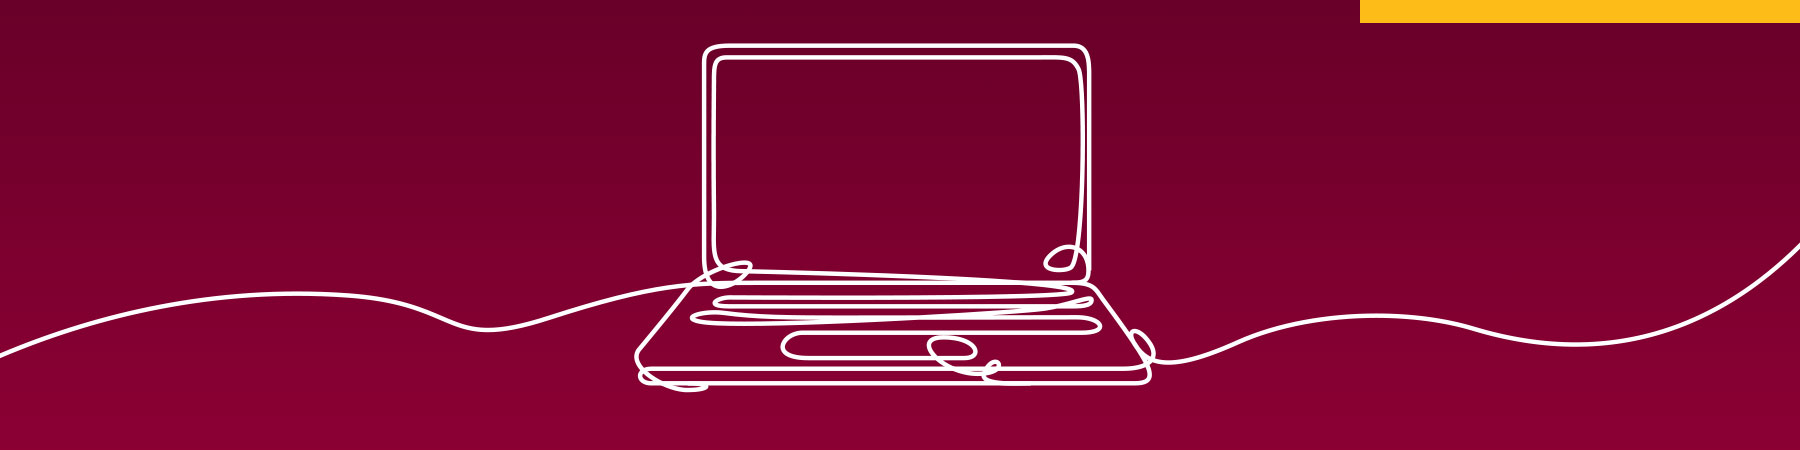 White line illustration of a laptop computer, against a maroon background, to demonstrate Loyola University Chicago's digital and website strategy, design, and development work.